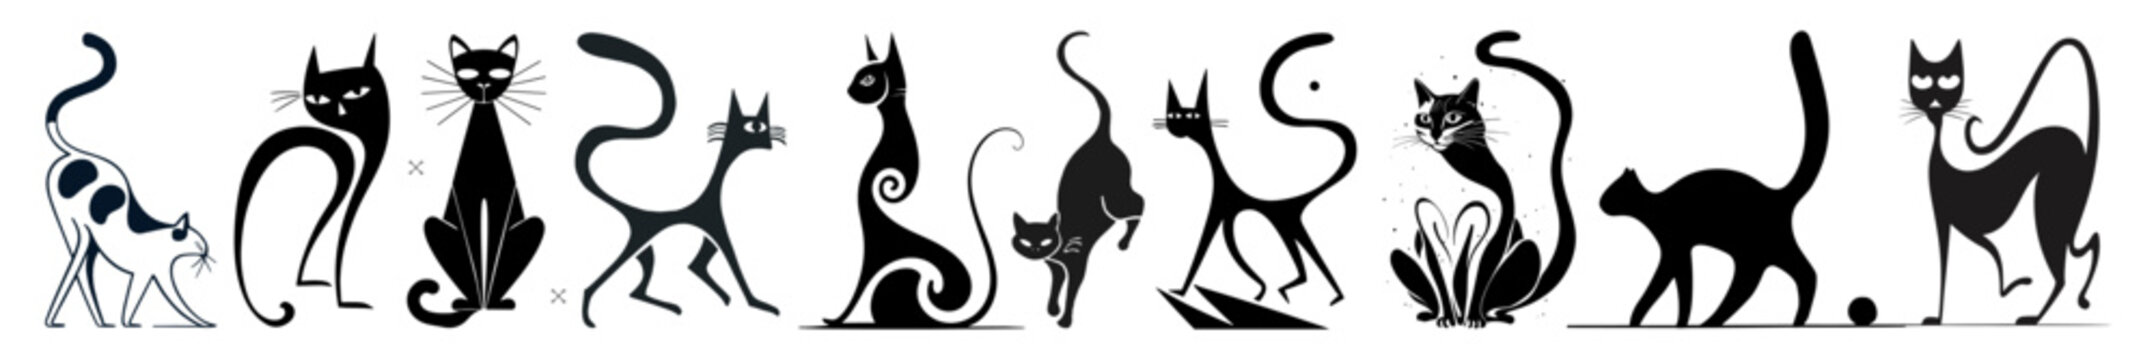 Abstract black cat silhouettes set. Outline monochrome drawing of cute cats in retro Atomic age style. Vintage vector illustrations, isolated design elements for logo, tattoo, wall art, card, poster.